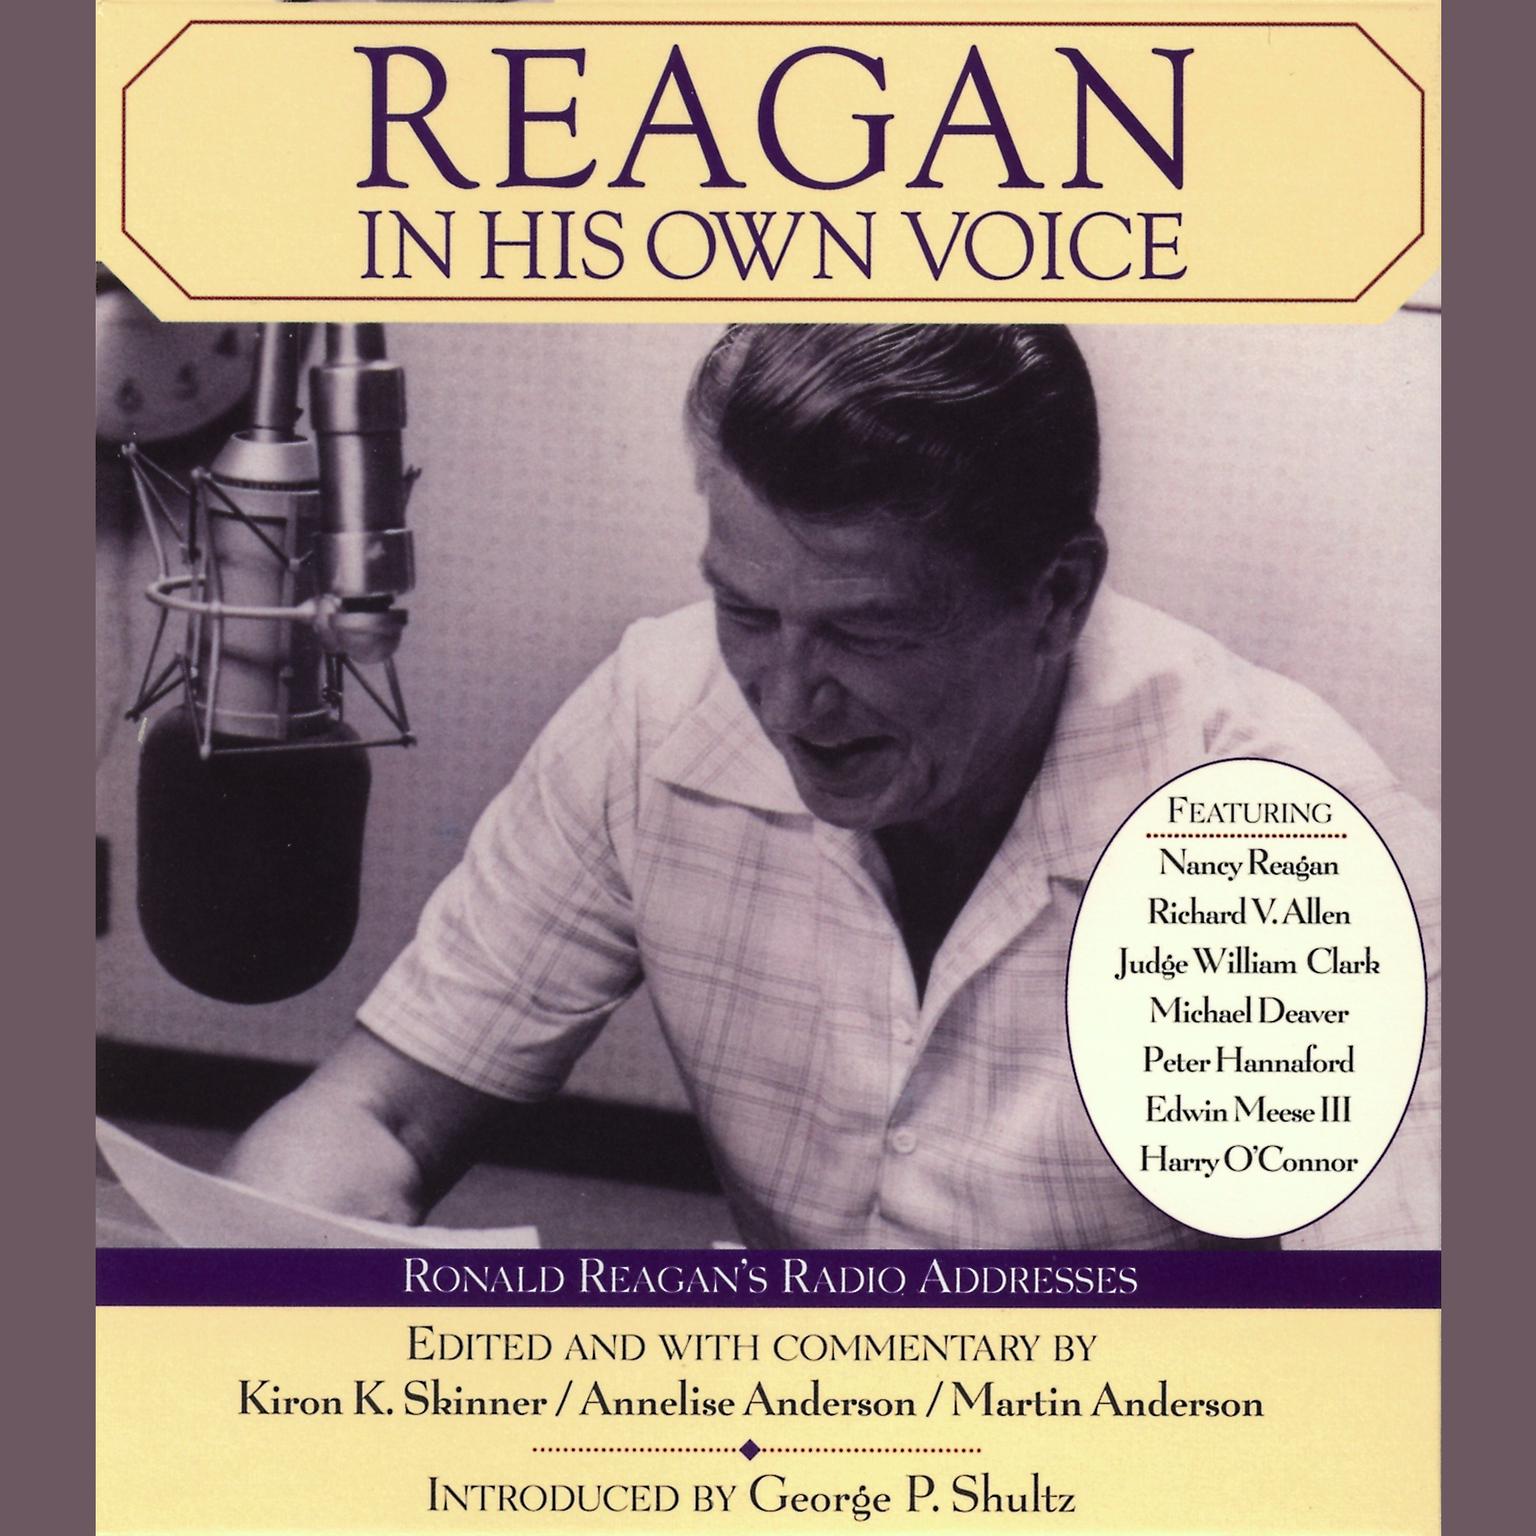 Reagan In His Own Voice (Abridged) Audiobook, by Kiron K. Skinner